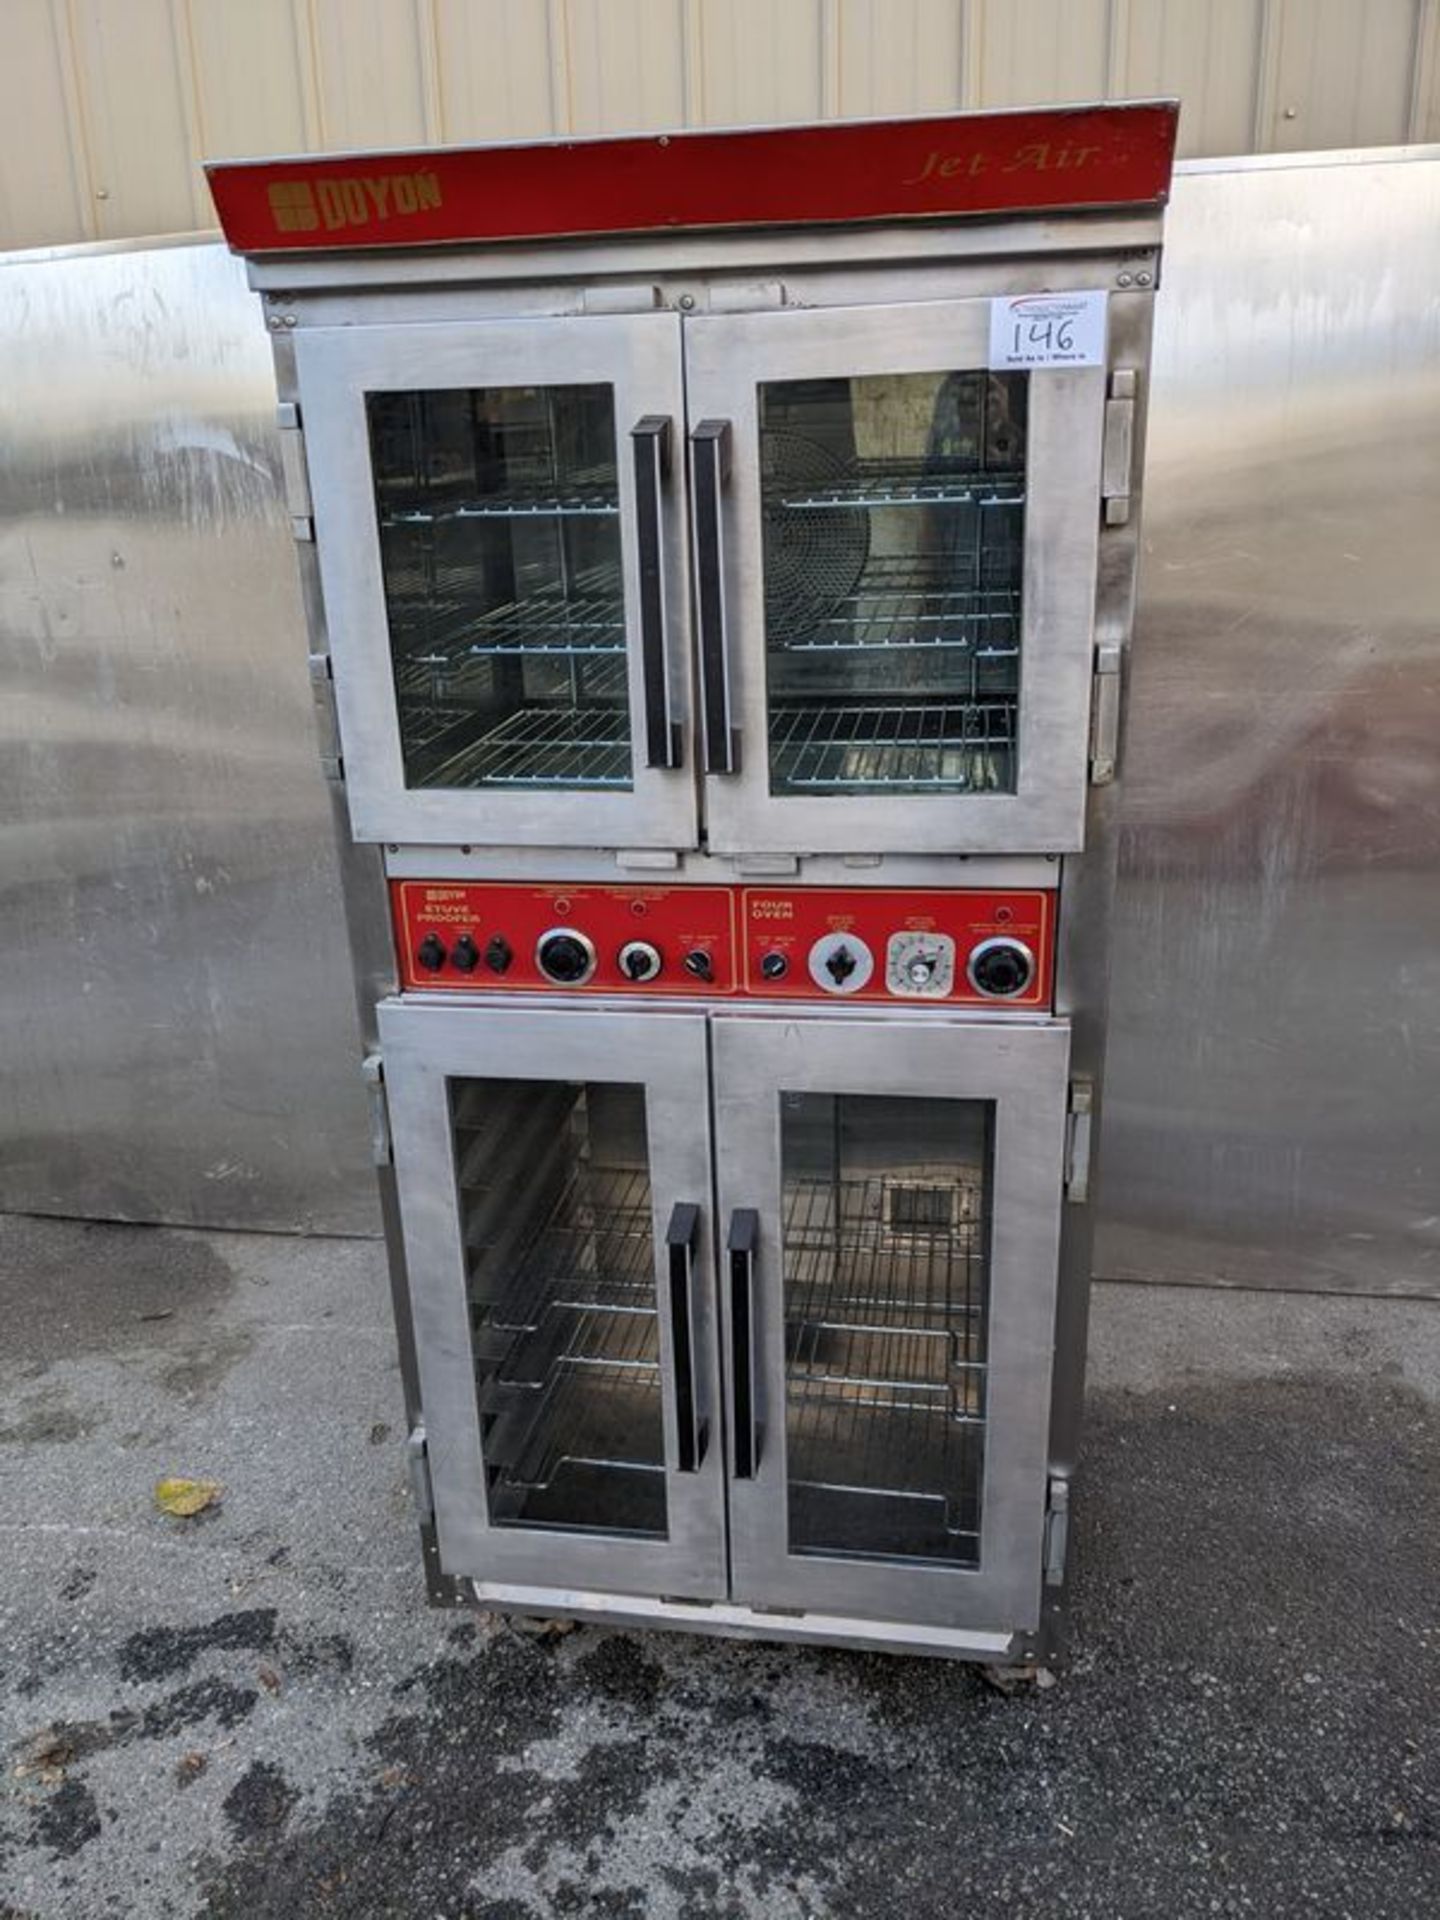 Doyon Jet Air Oven with Proofer Below